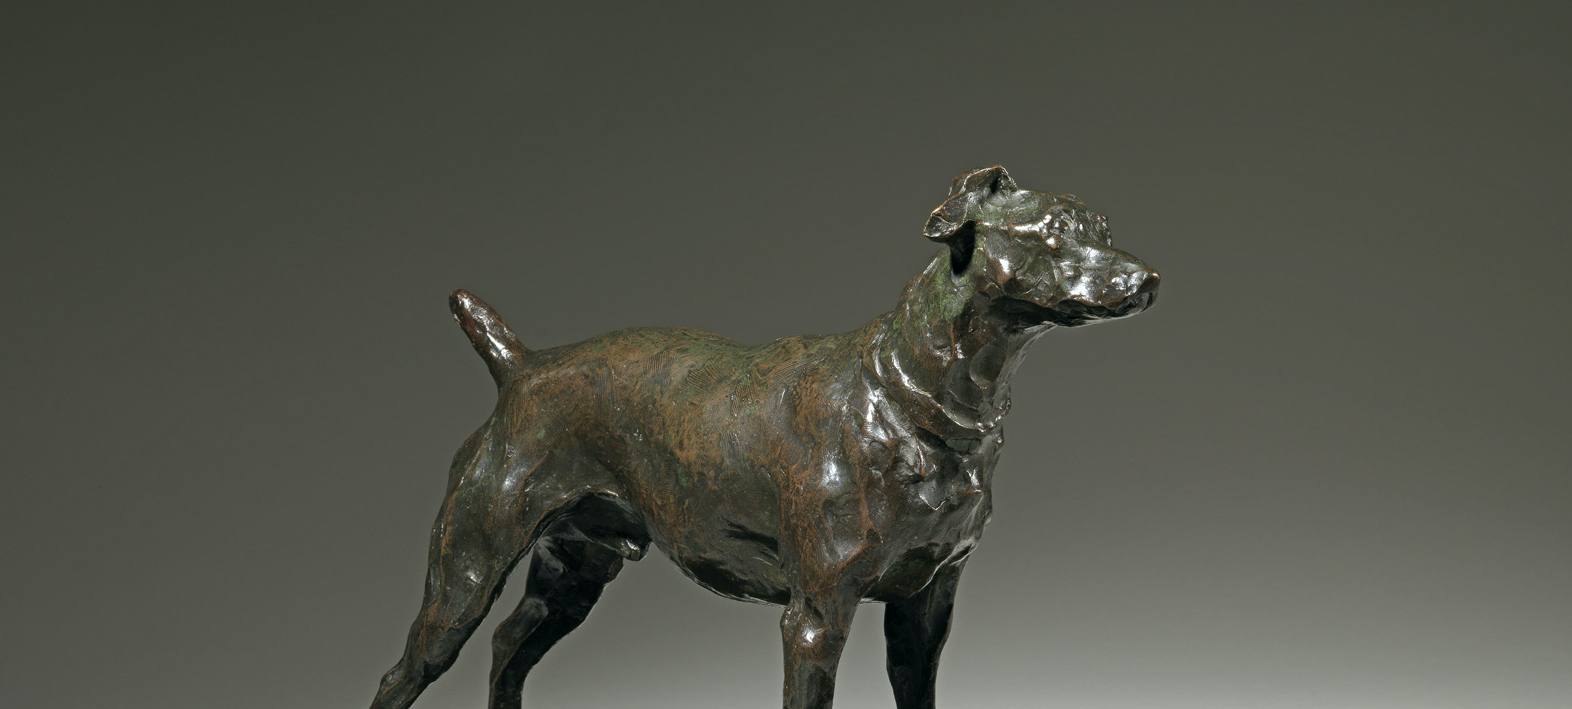 Dogs, Cats and Other Best Friends – A Selection of Animal Sculpture